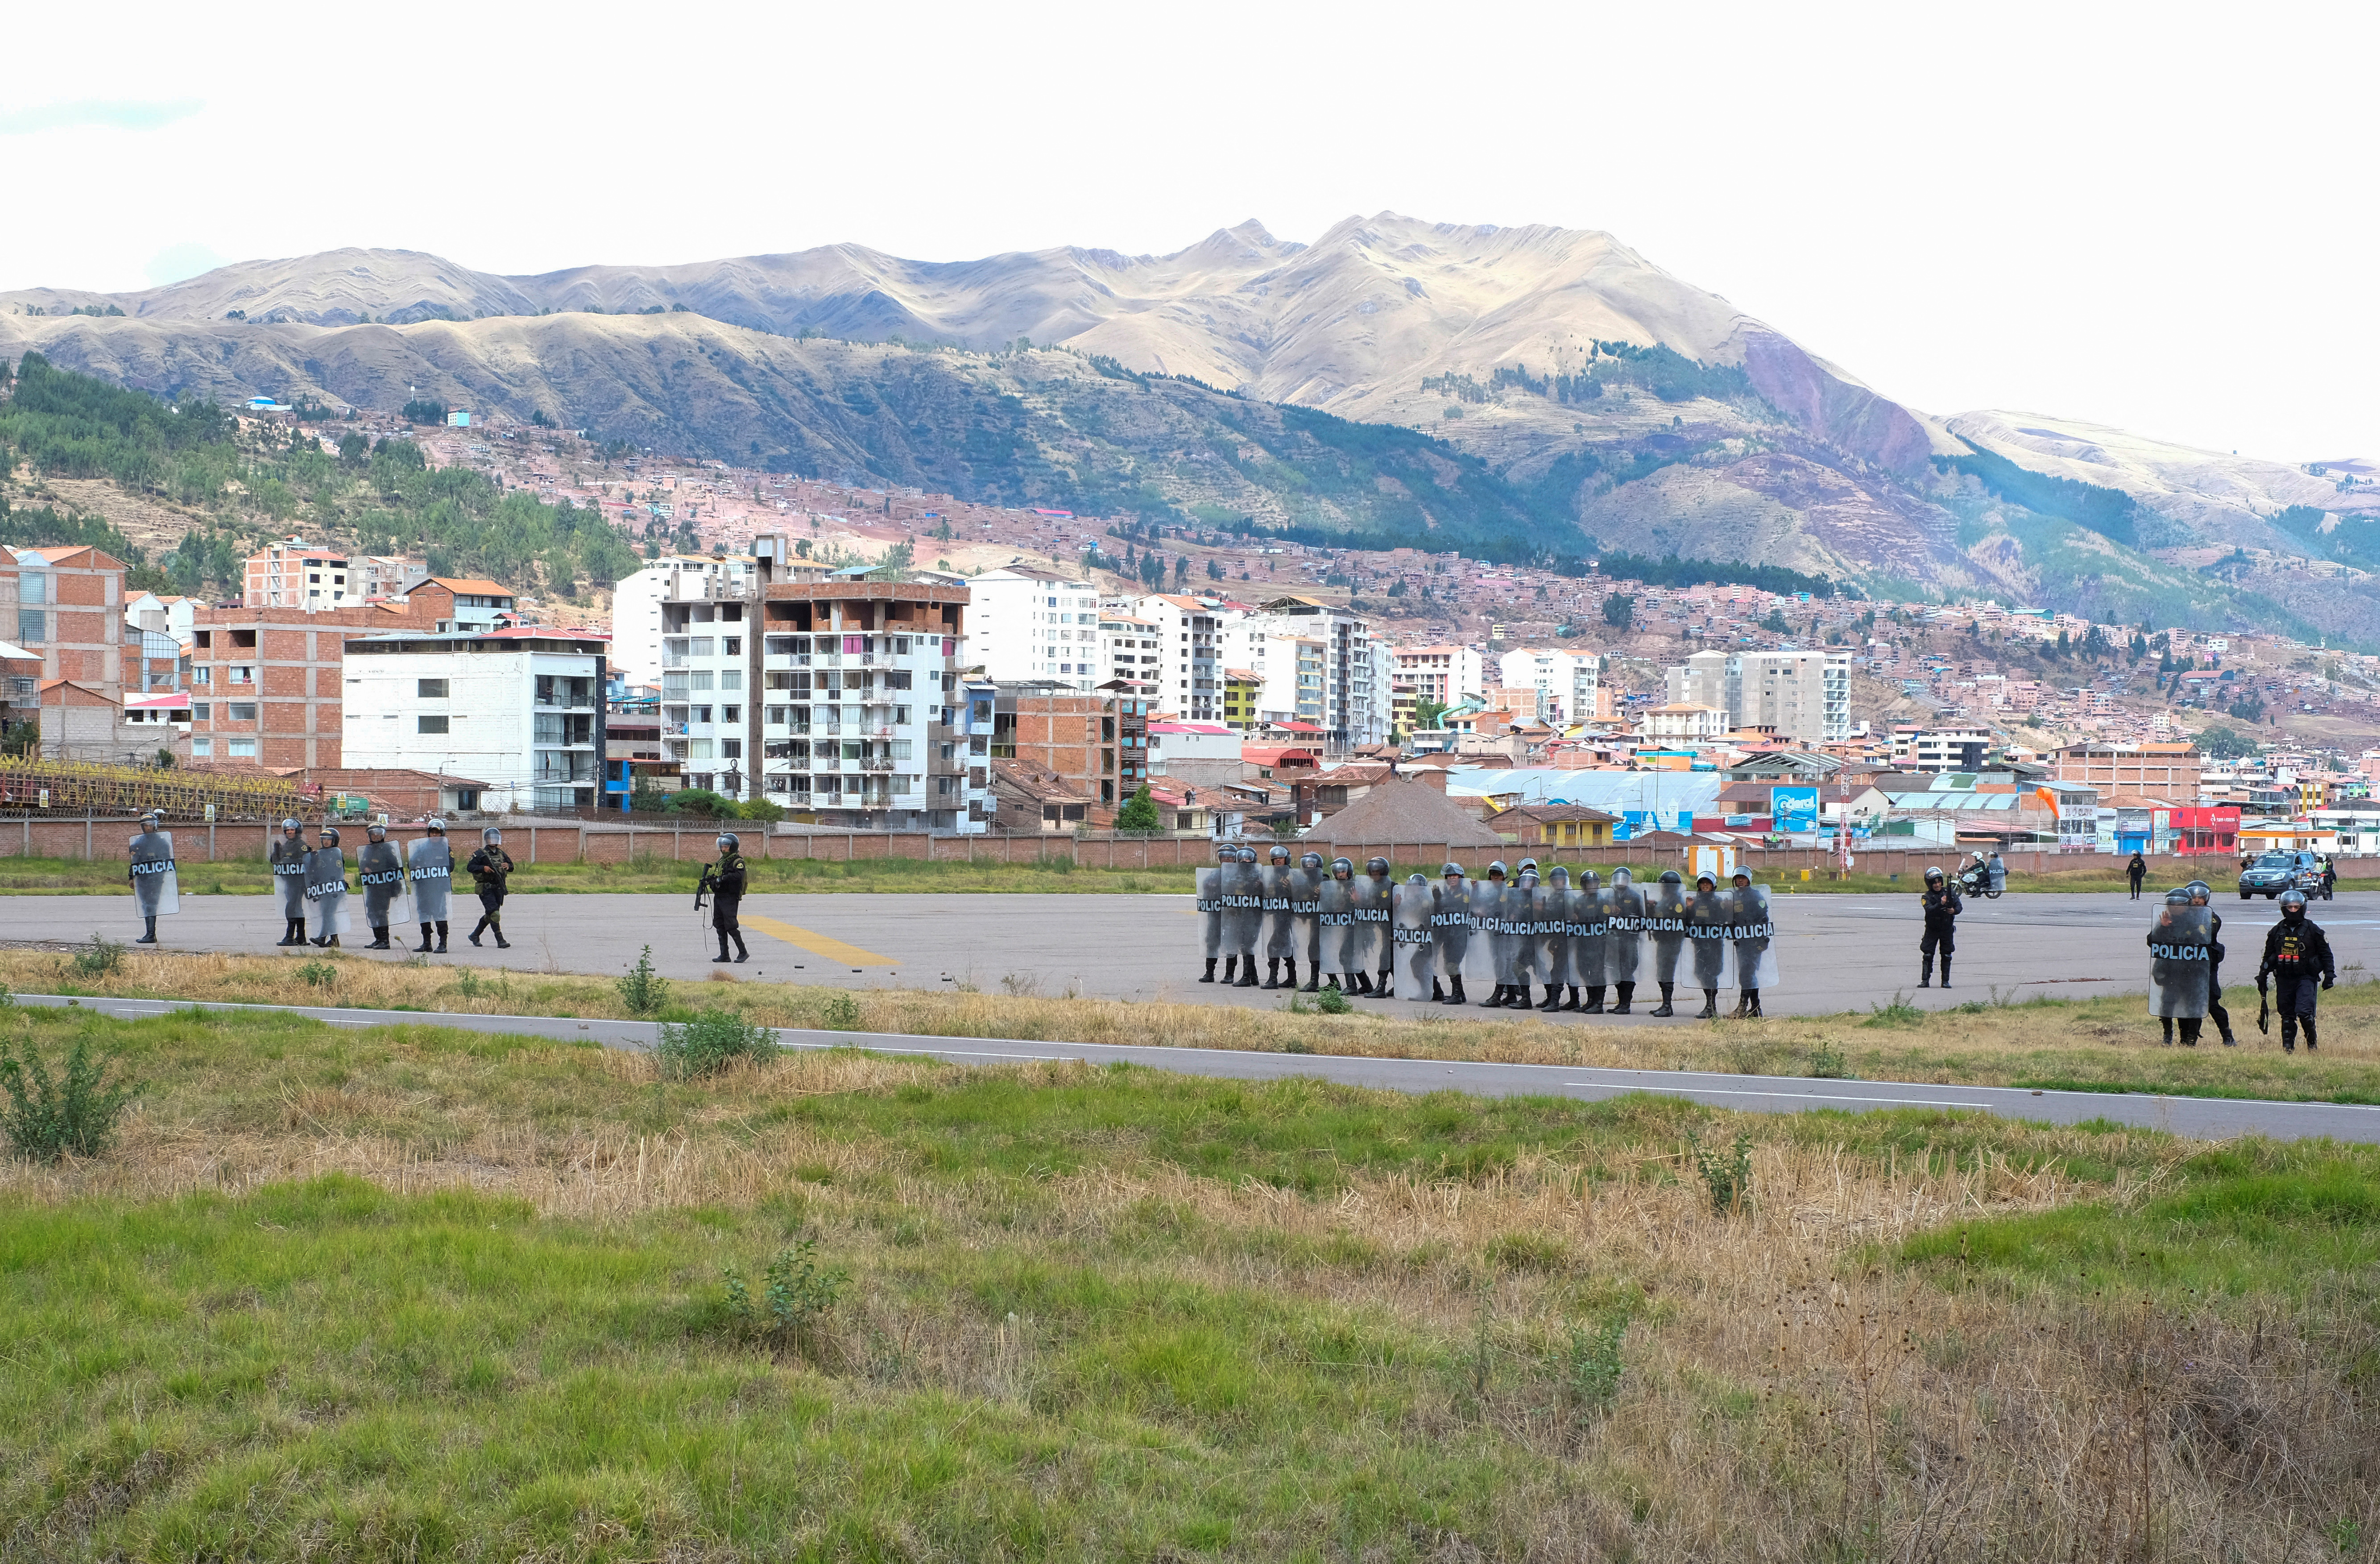 Demonstrations demanding dissolution of Peru's Congress and democratic elections, in Cuzco